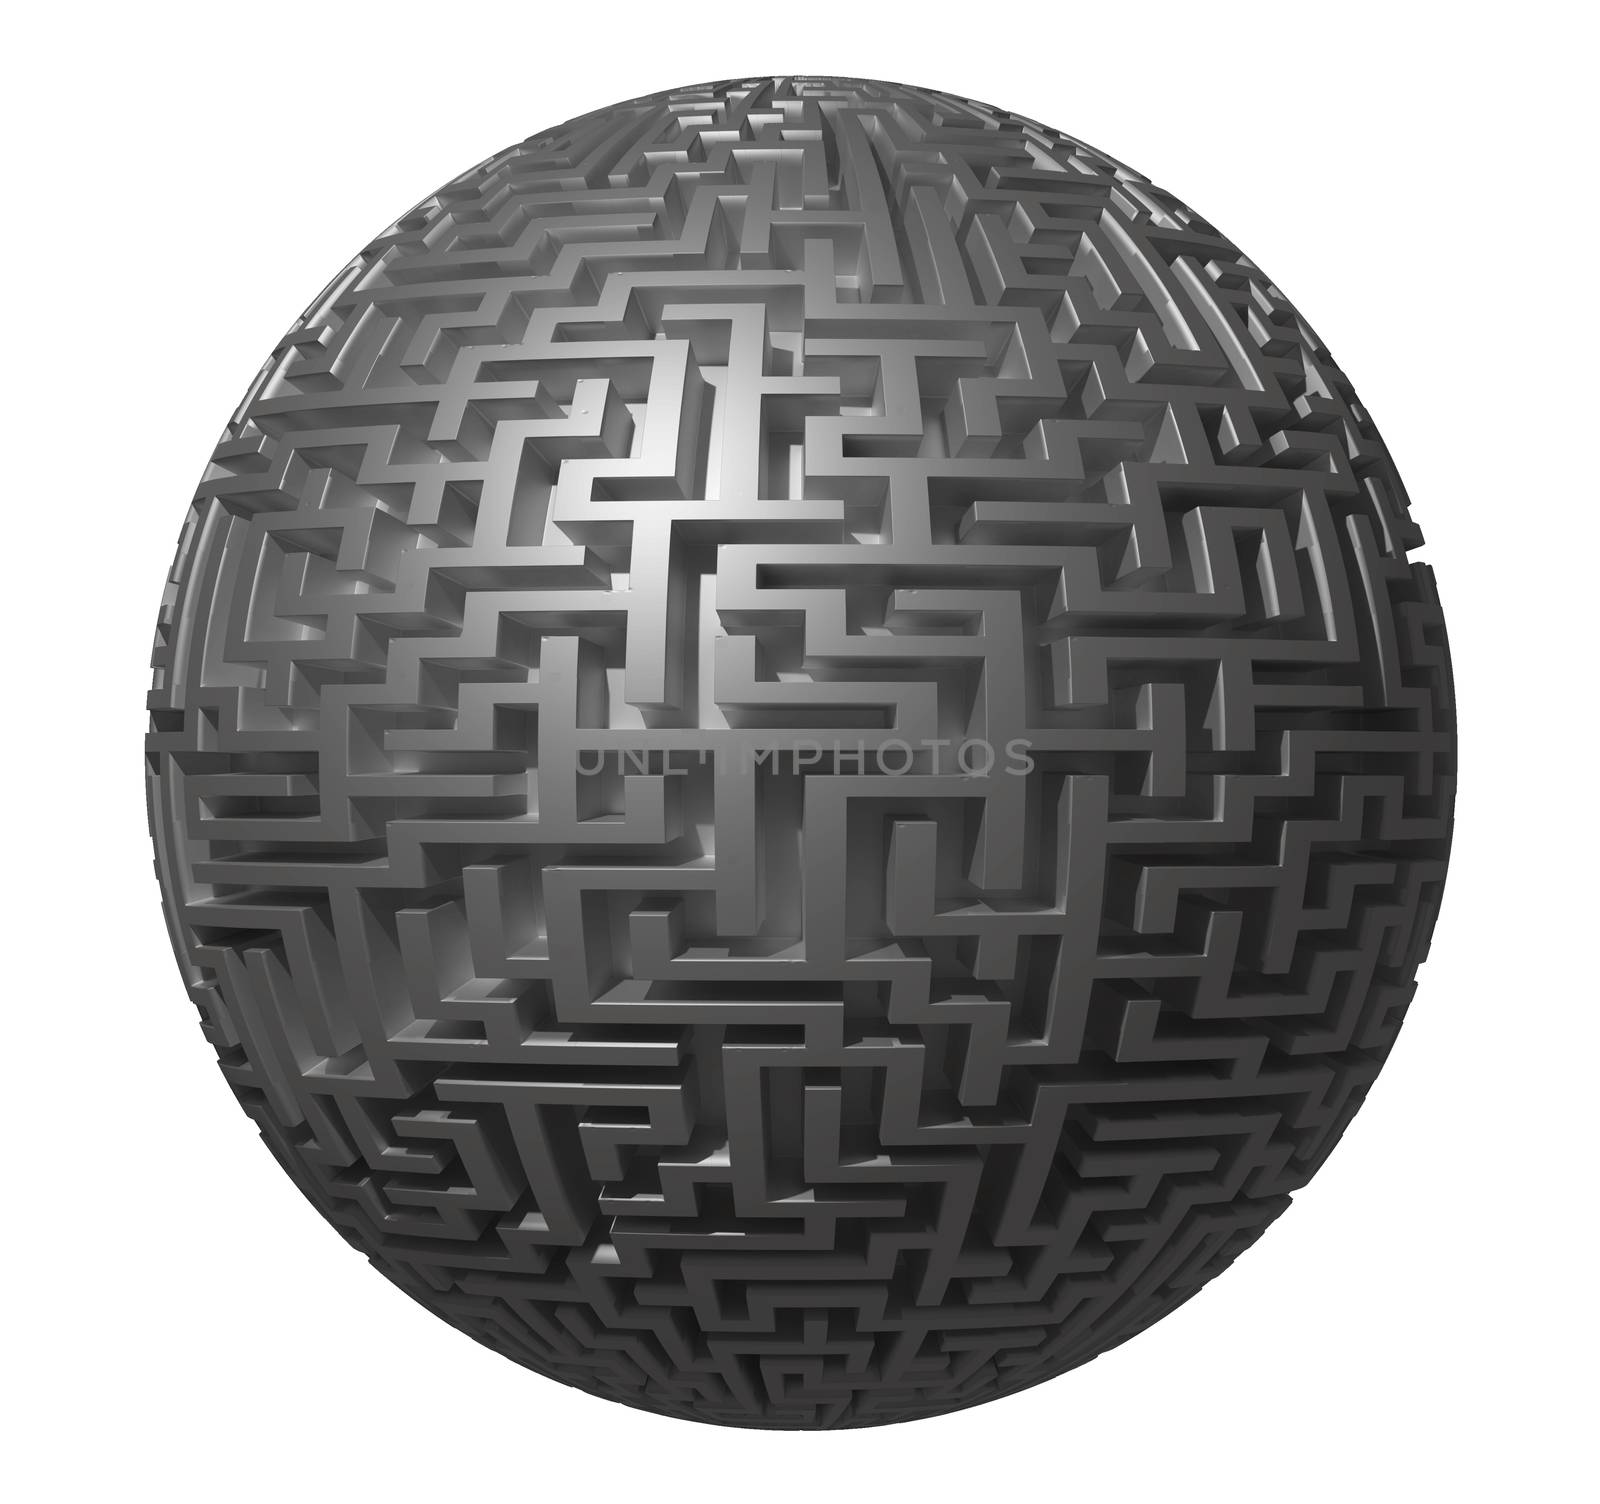 labyrinth planet - endless maze with spherical shape 3d illustration by dengess